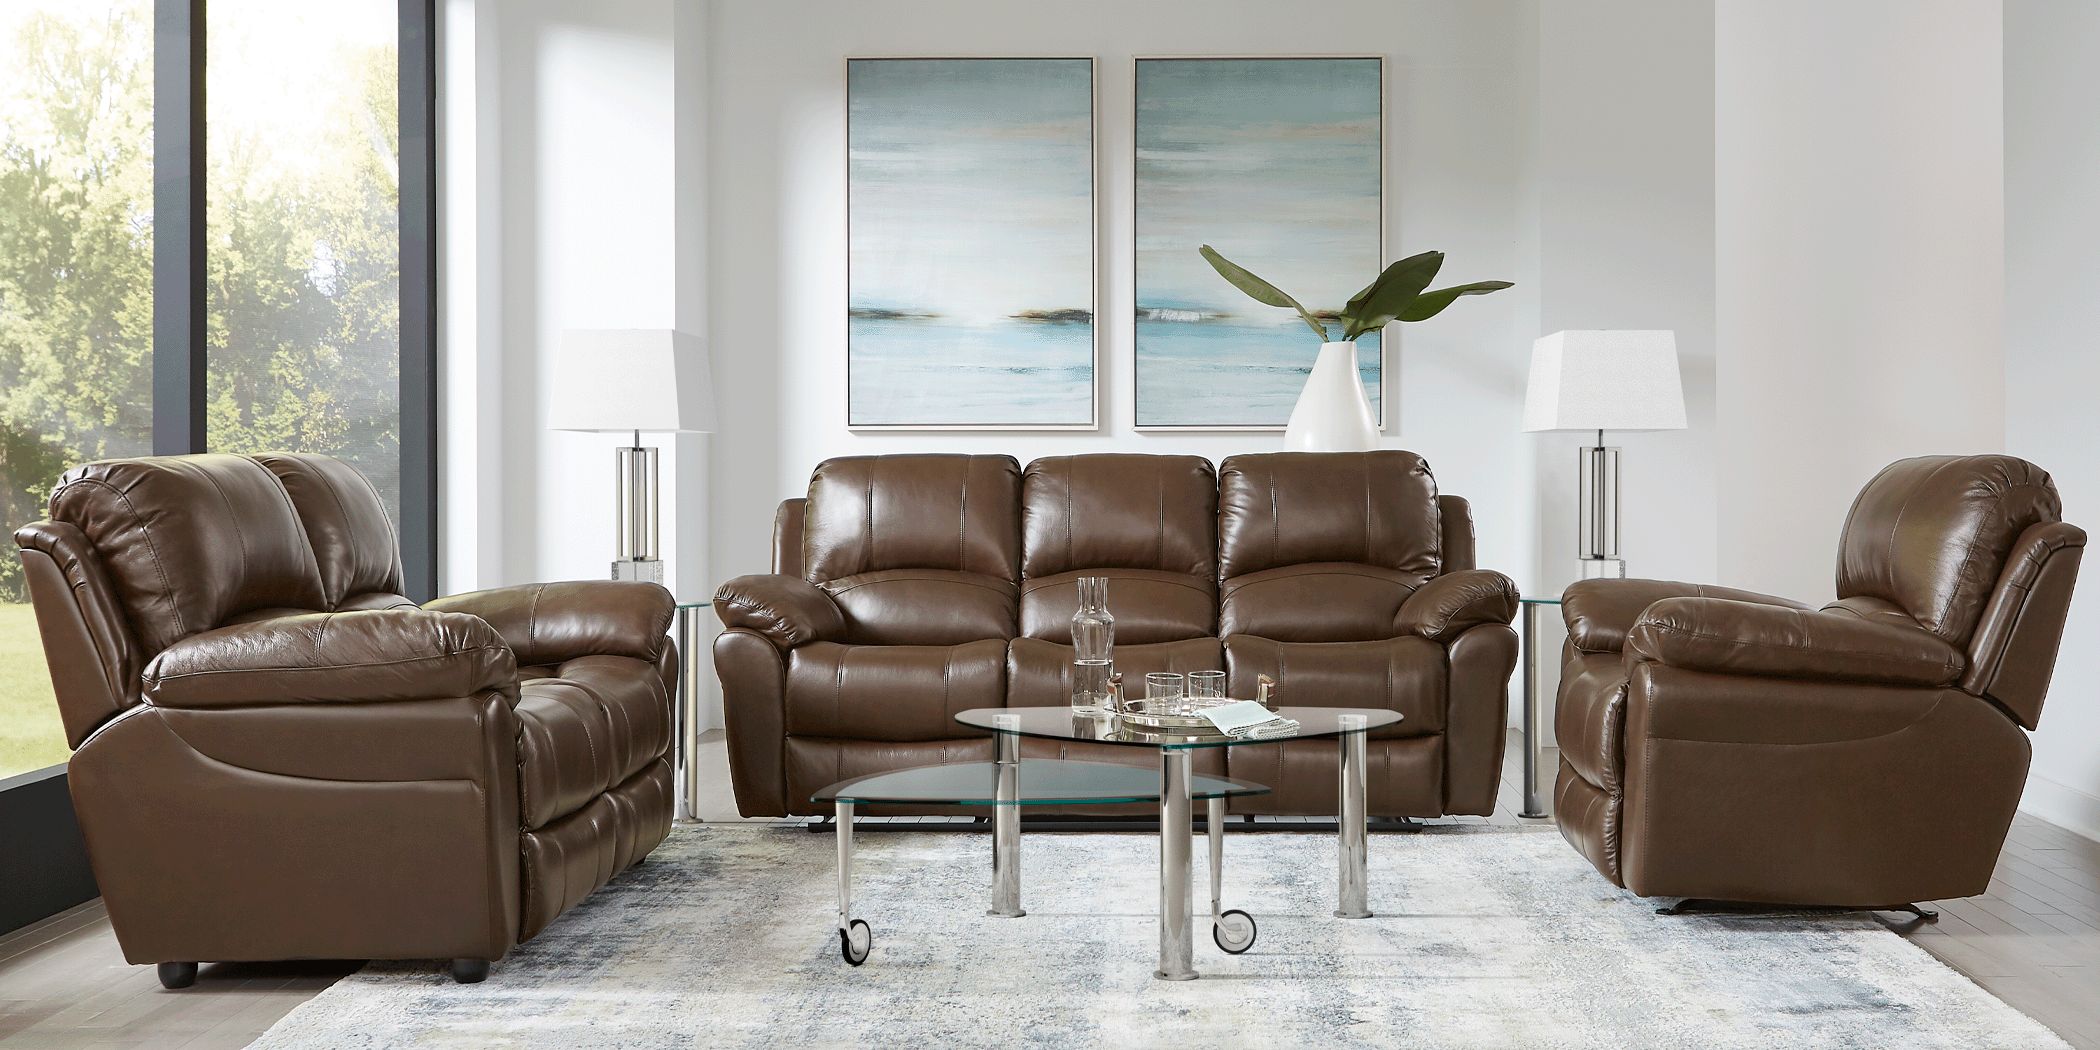 vercelli brown leather reclining sofa reviews